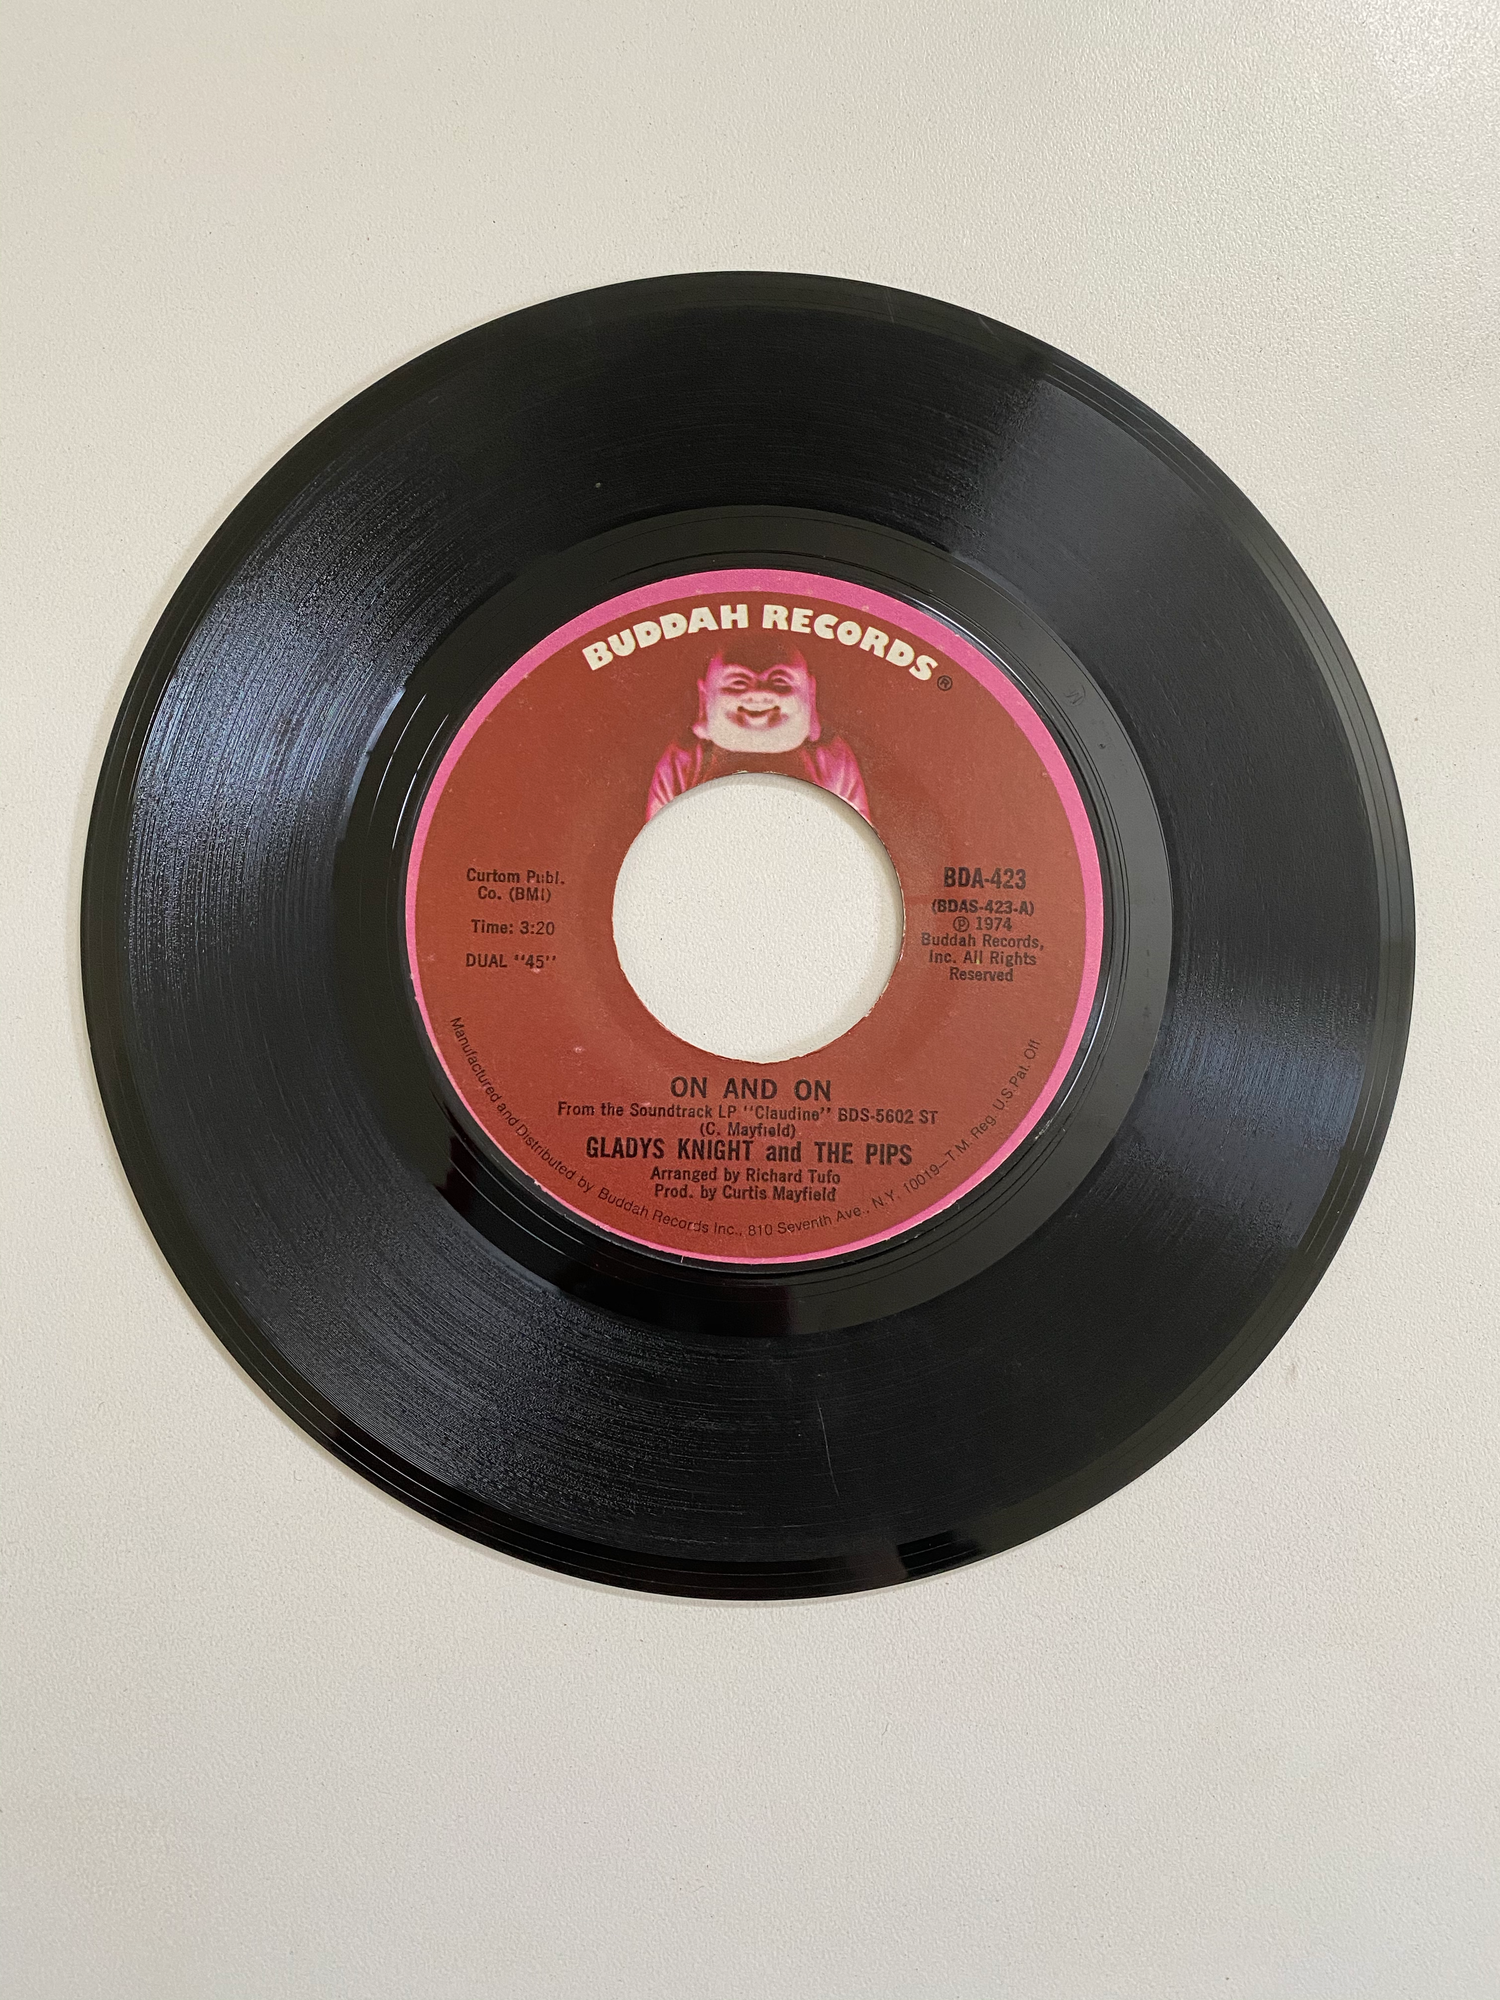 Gladys Knight and The Pips - On and On | 45 The Vintedge Co.